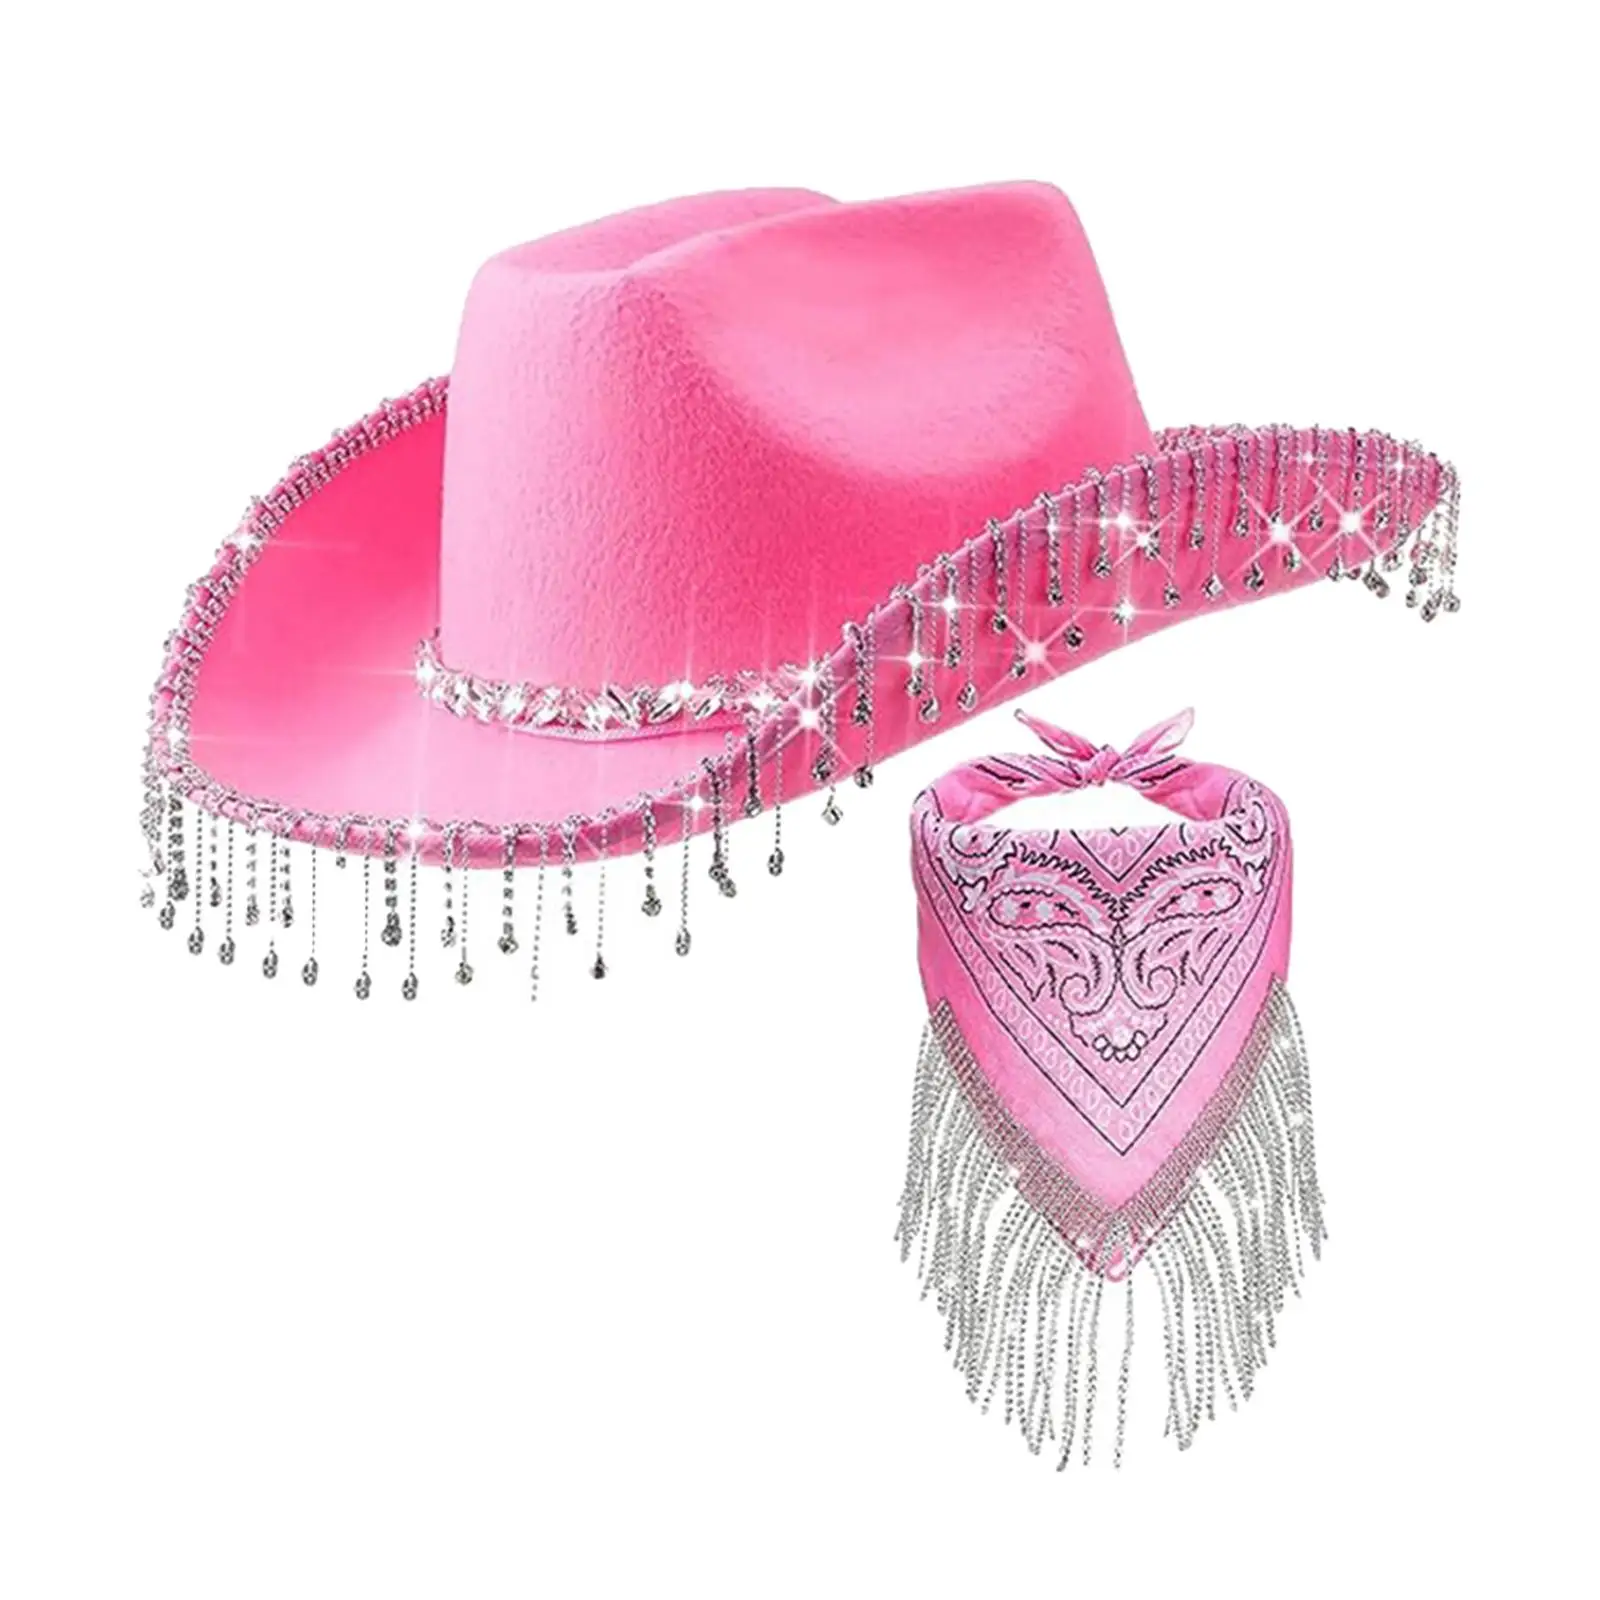 Western Cowgirl Hat Cowboy Hat with Fringed Bandana Set for Women Ladies Girls Outdoor Wedding Photo Props Costume Accessories